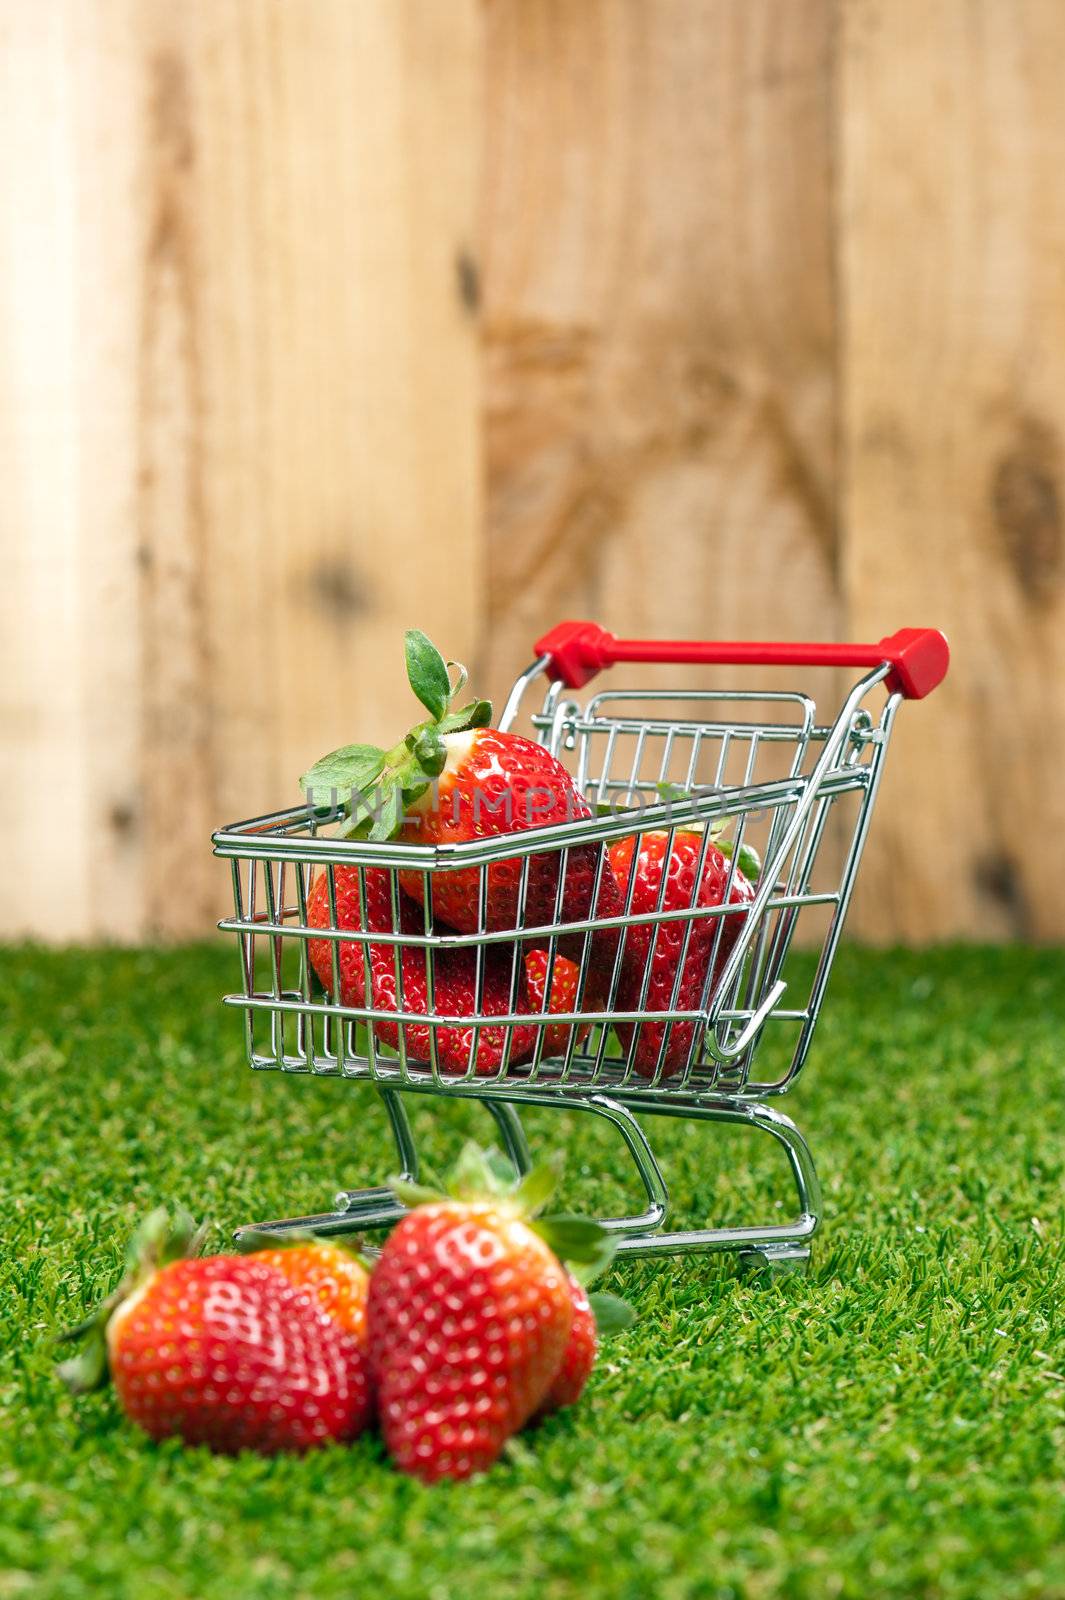 Strawberries in a shopping cart in front of a timber wall